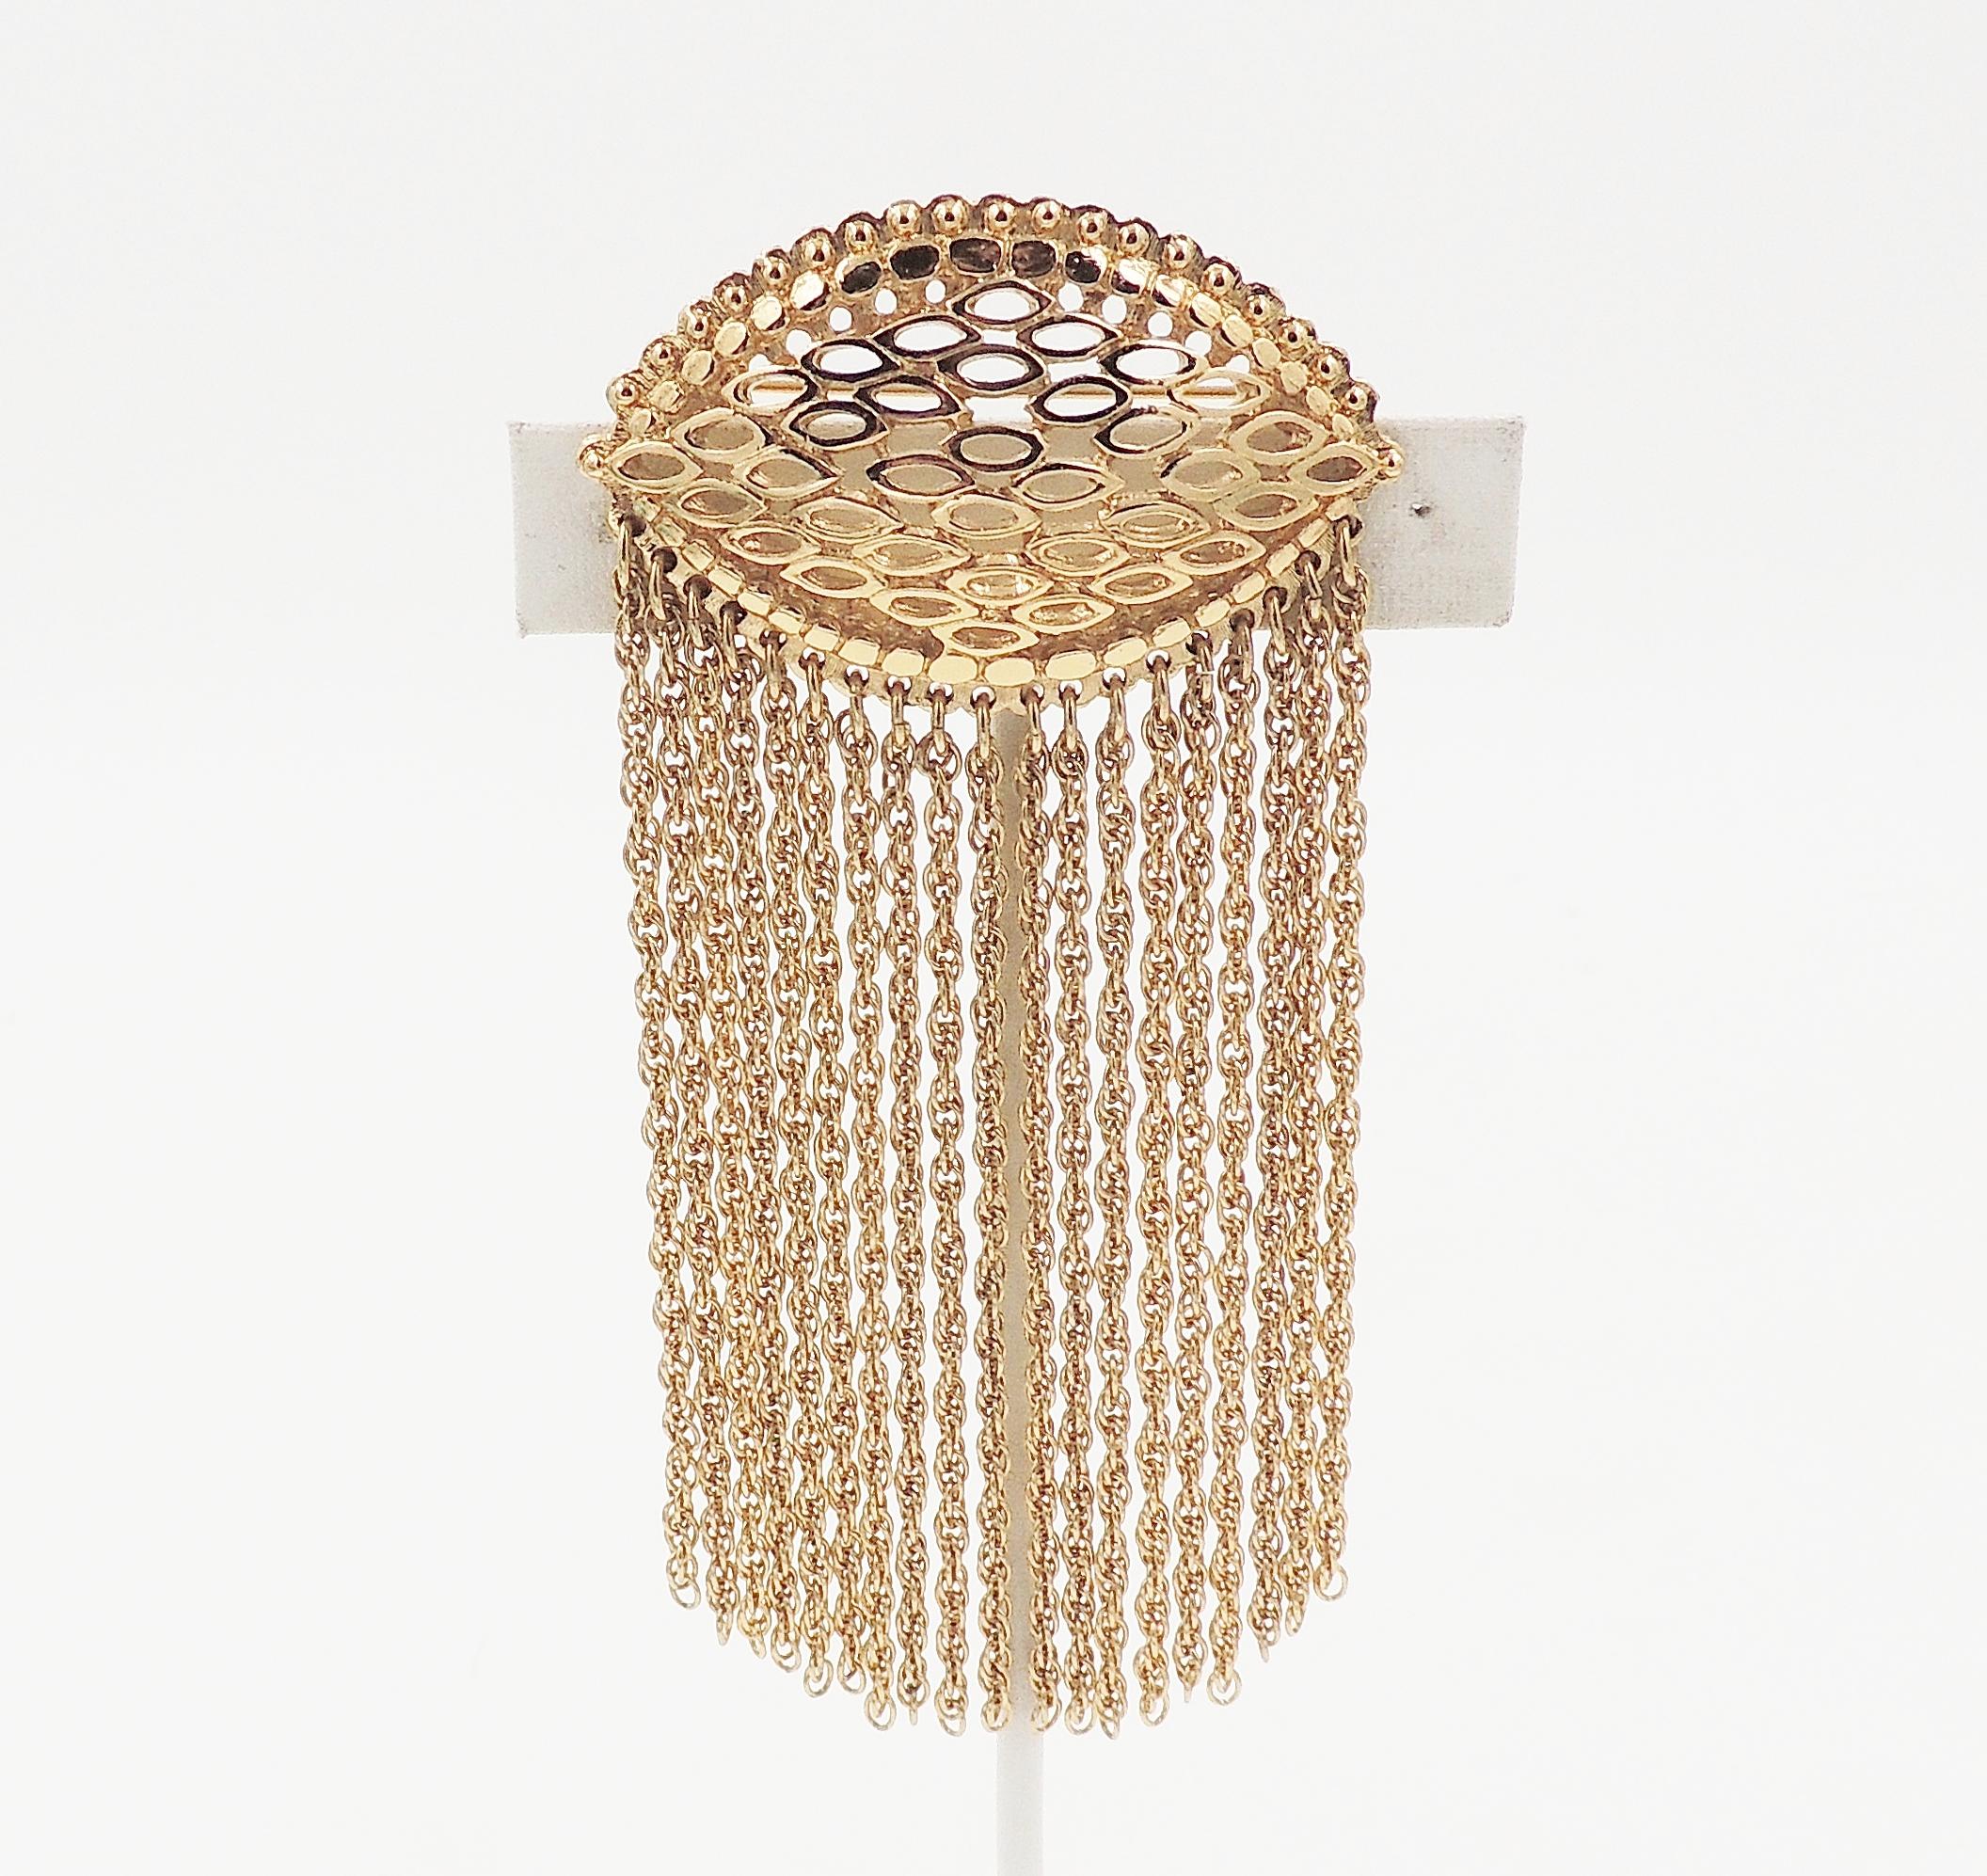 1970s goldtone fringe brooch with security clasp. Marked 